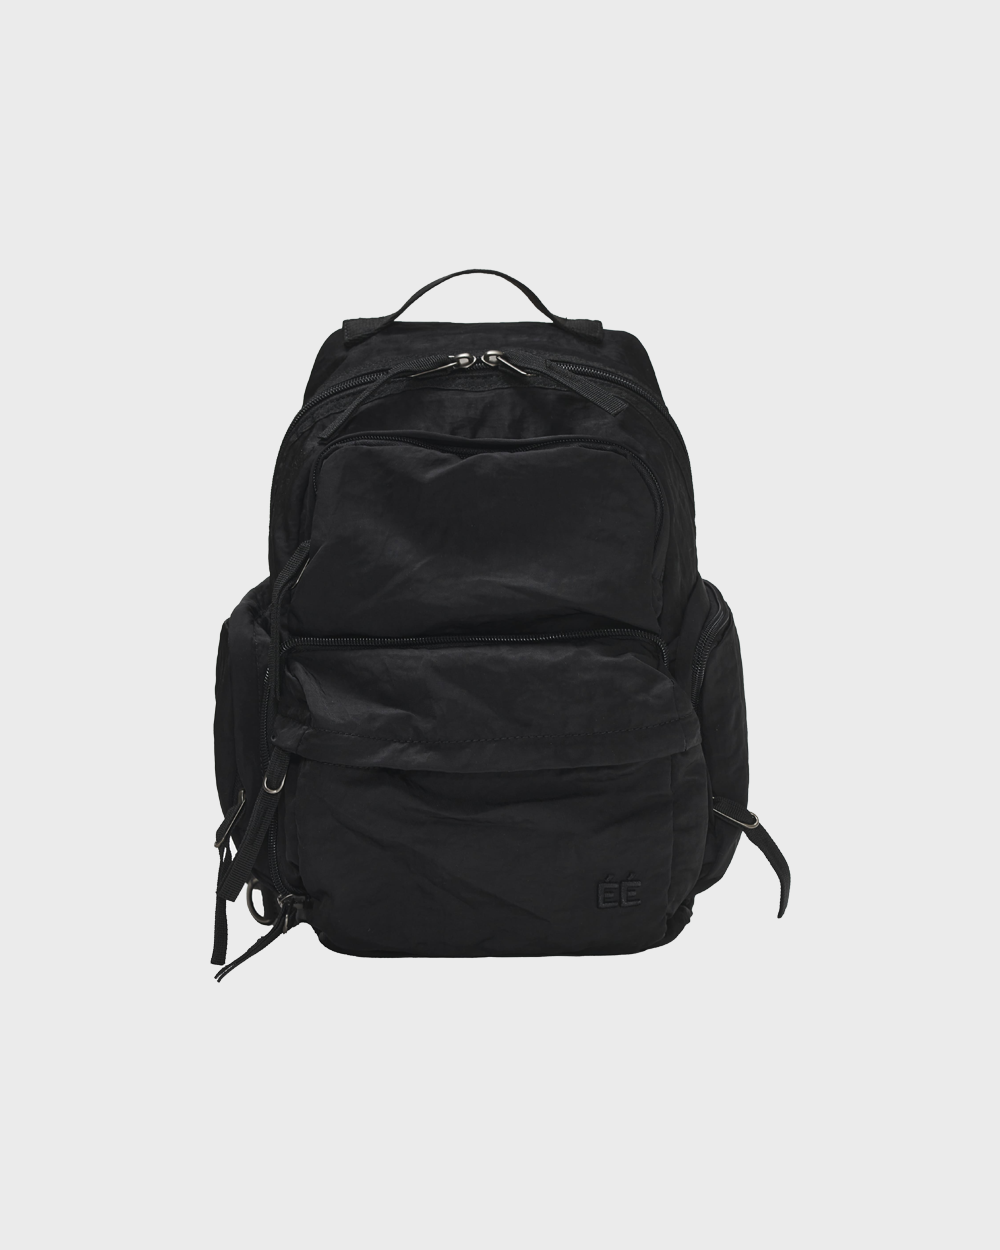 Transformable Utility Pocket Backpack (Small)